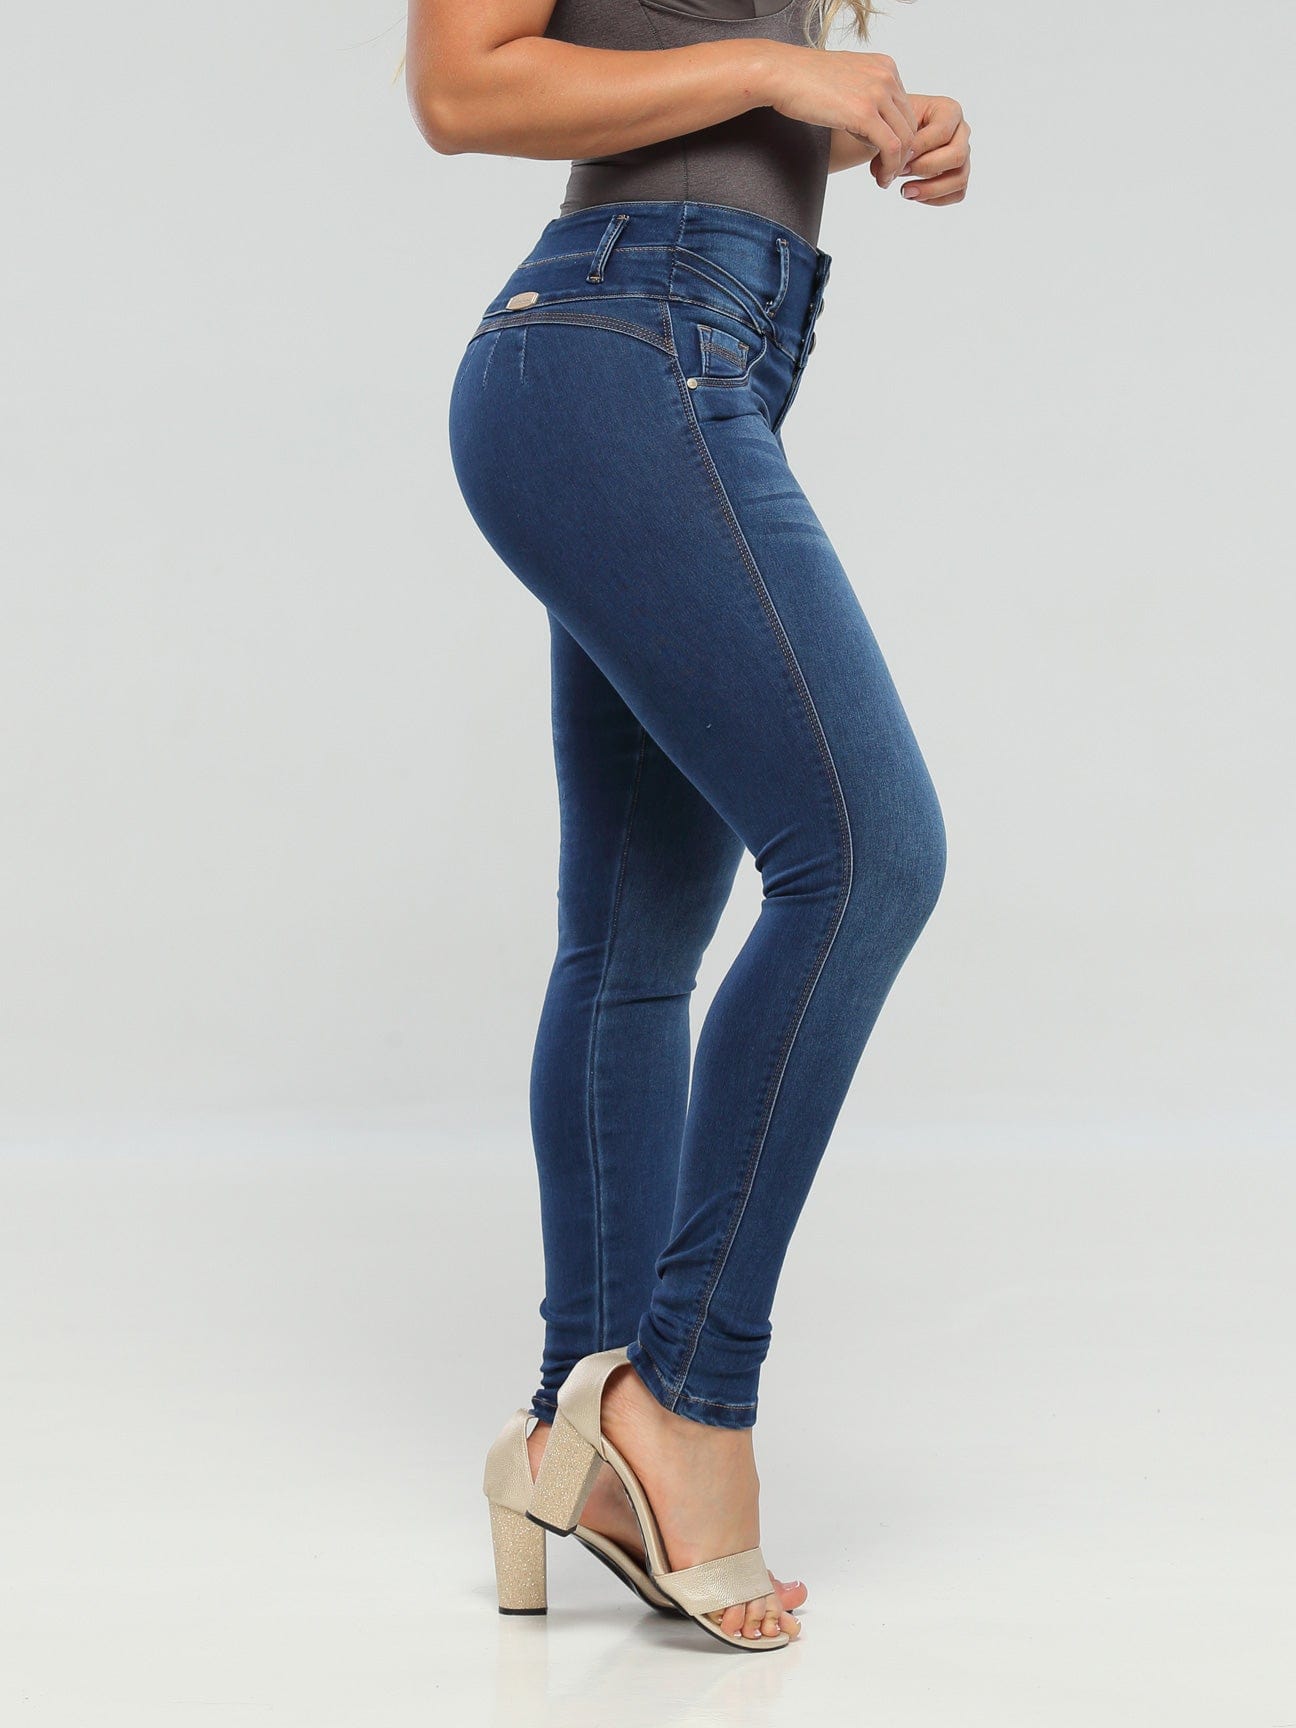 Butt Lifting Colombian Jeans (Levanta Cola) - Triny Designs